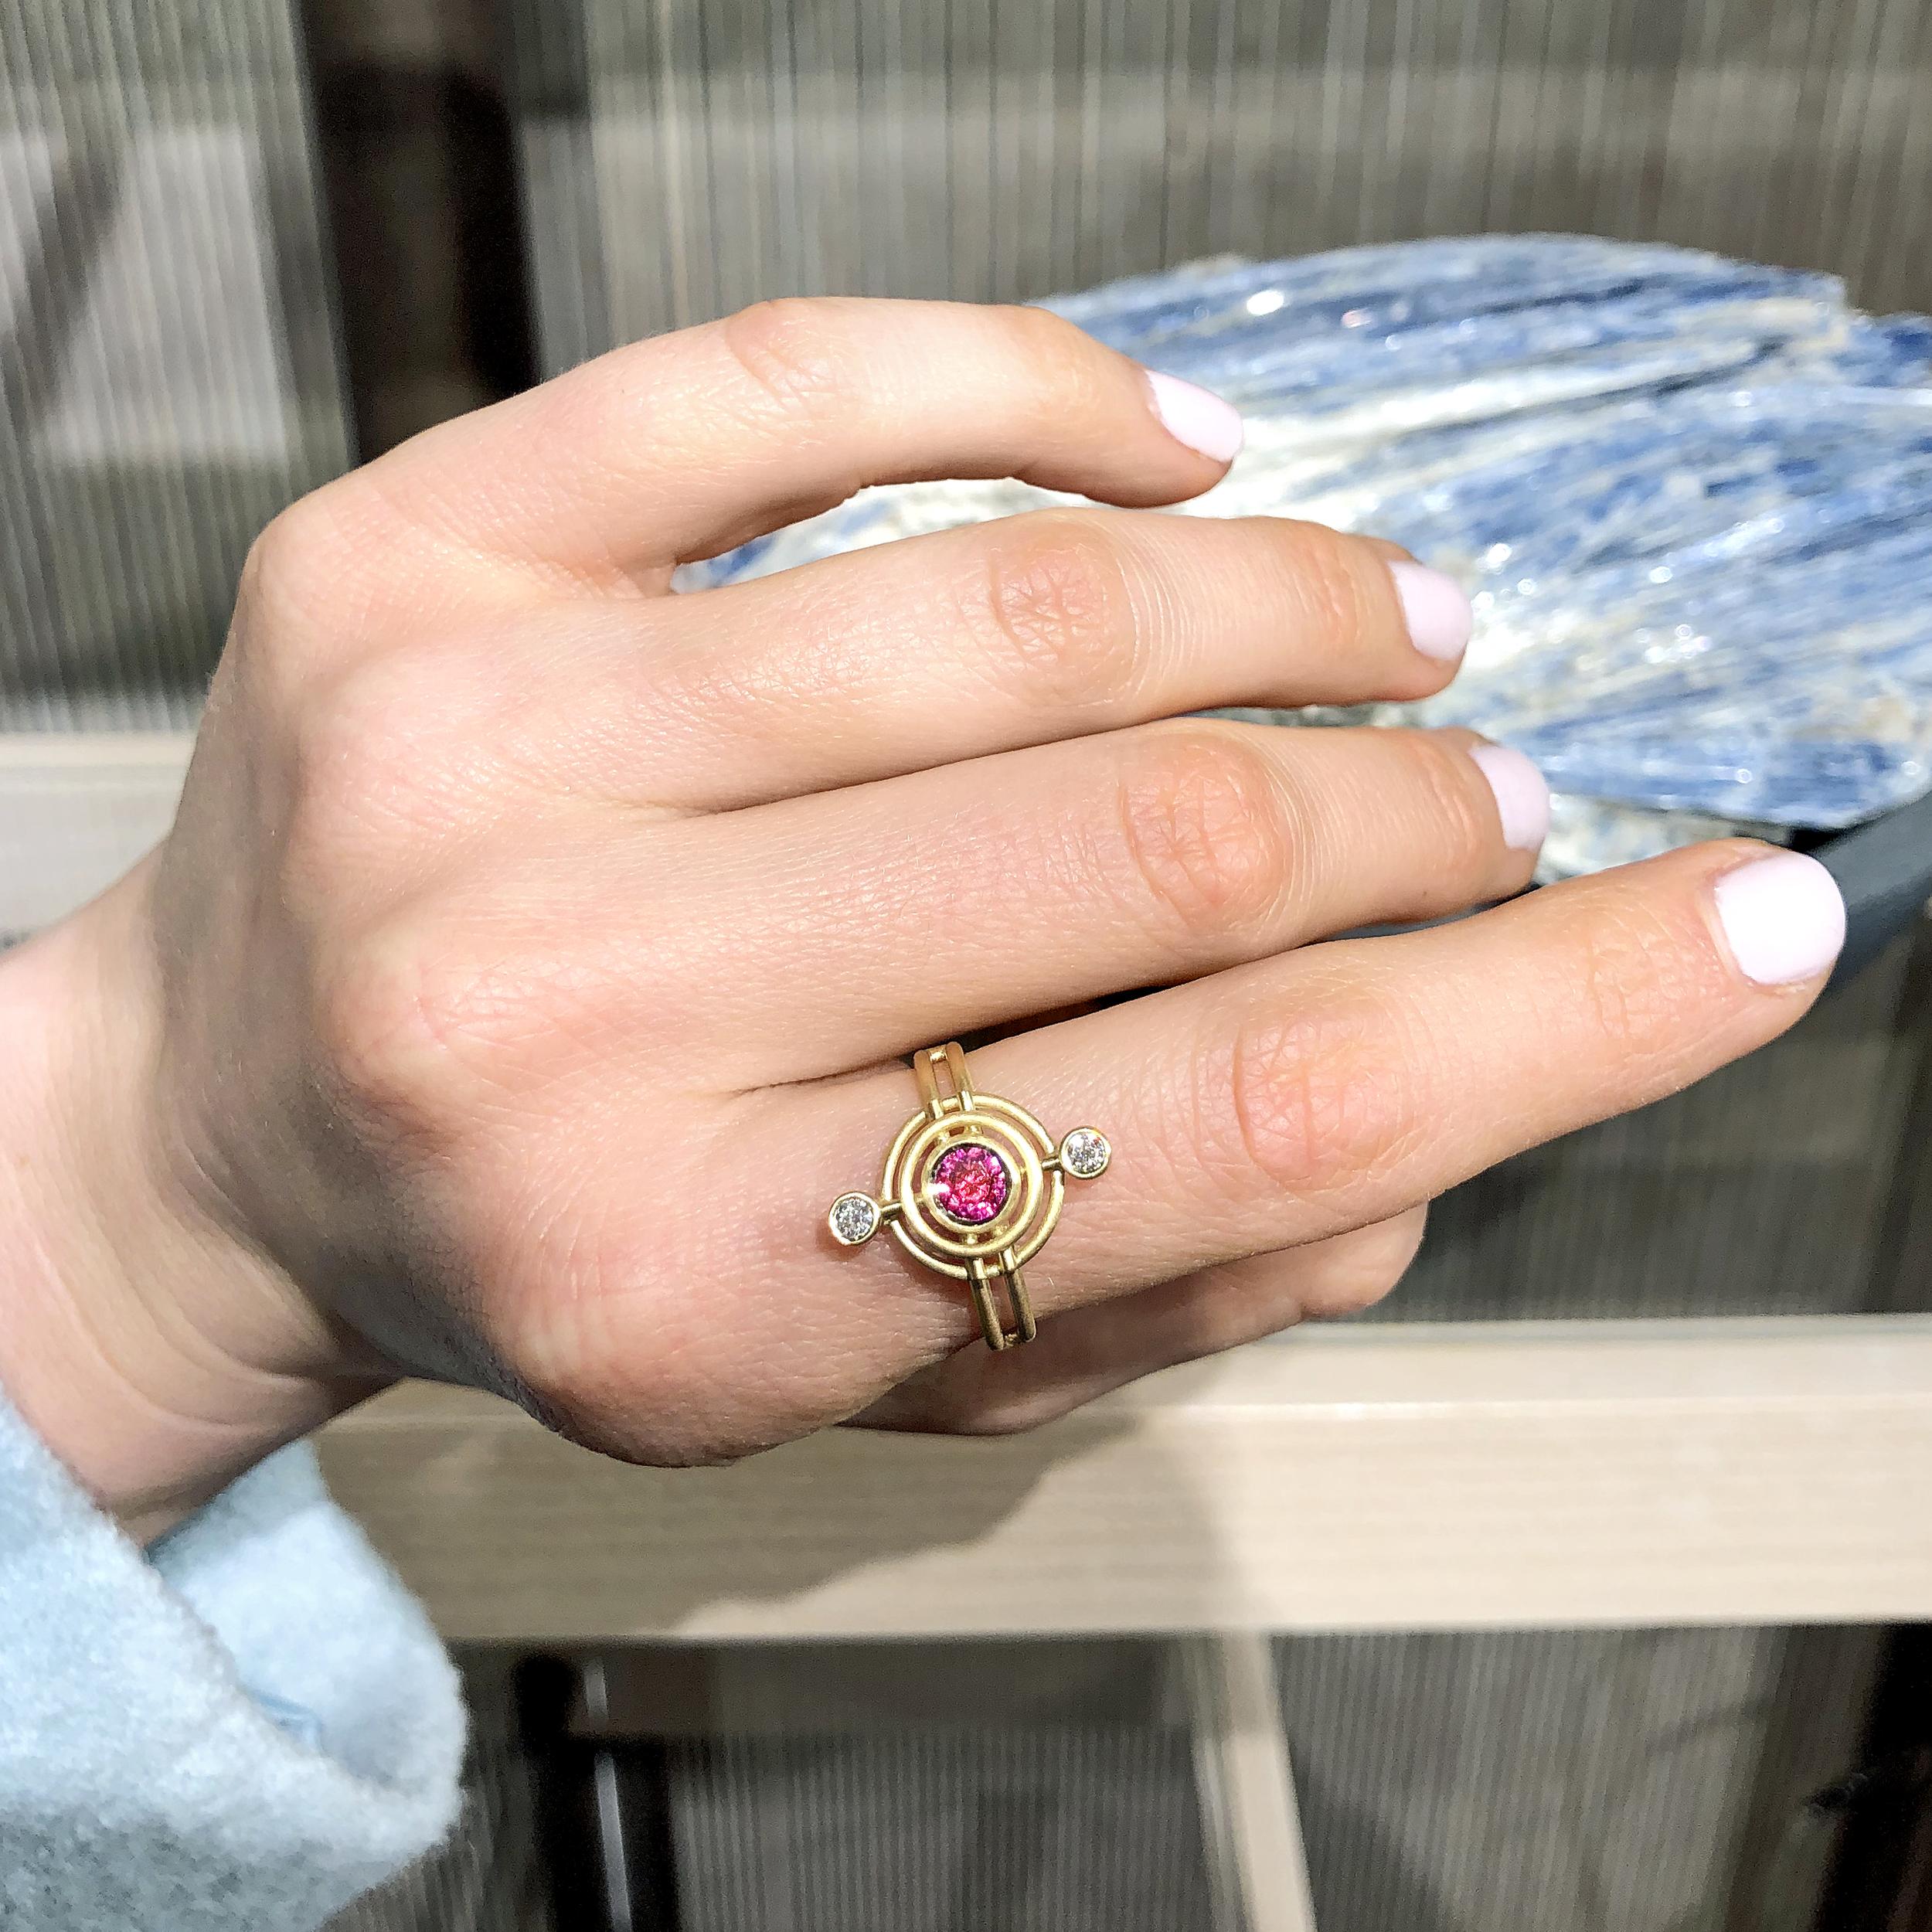 One of a Kind Double Circle Galaxy Ring handcrafted in London by jewelry maker Shimell and Madden in intricately-textured 18k yellow gold featuring a fiery and vibrant round faceted brilliant-cut 0.59 carat deep pink sapphire complemented by two